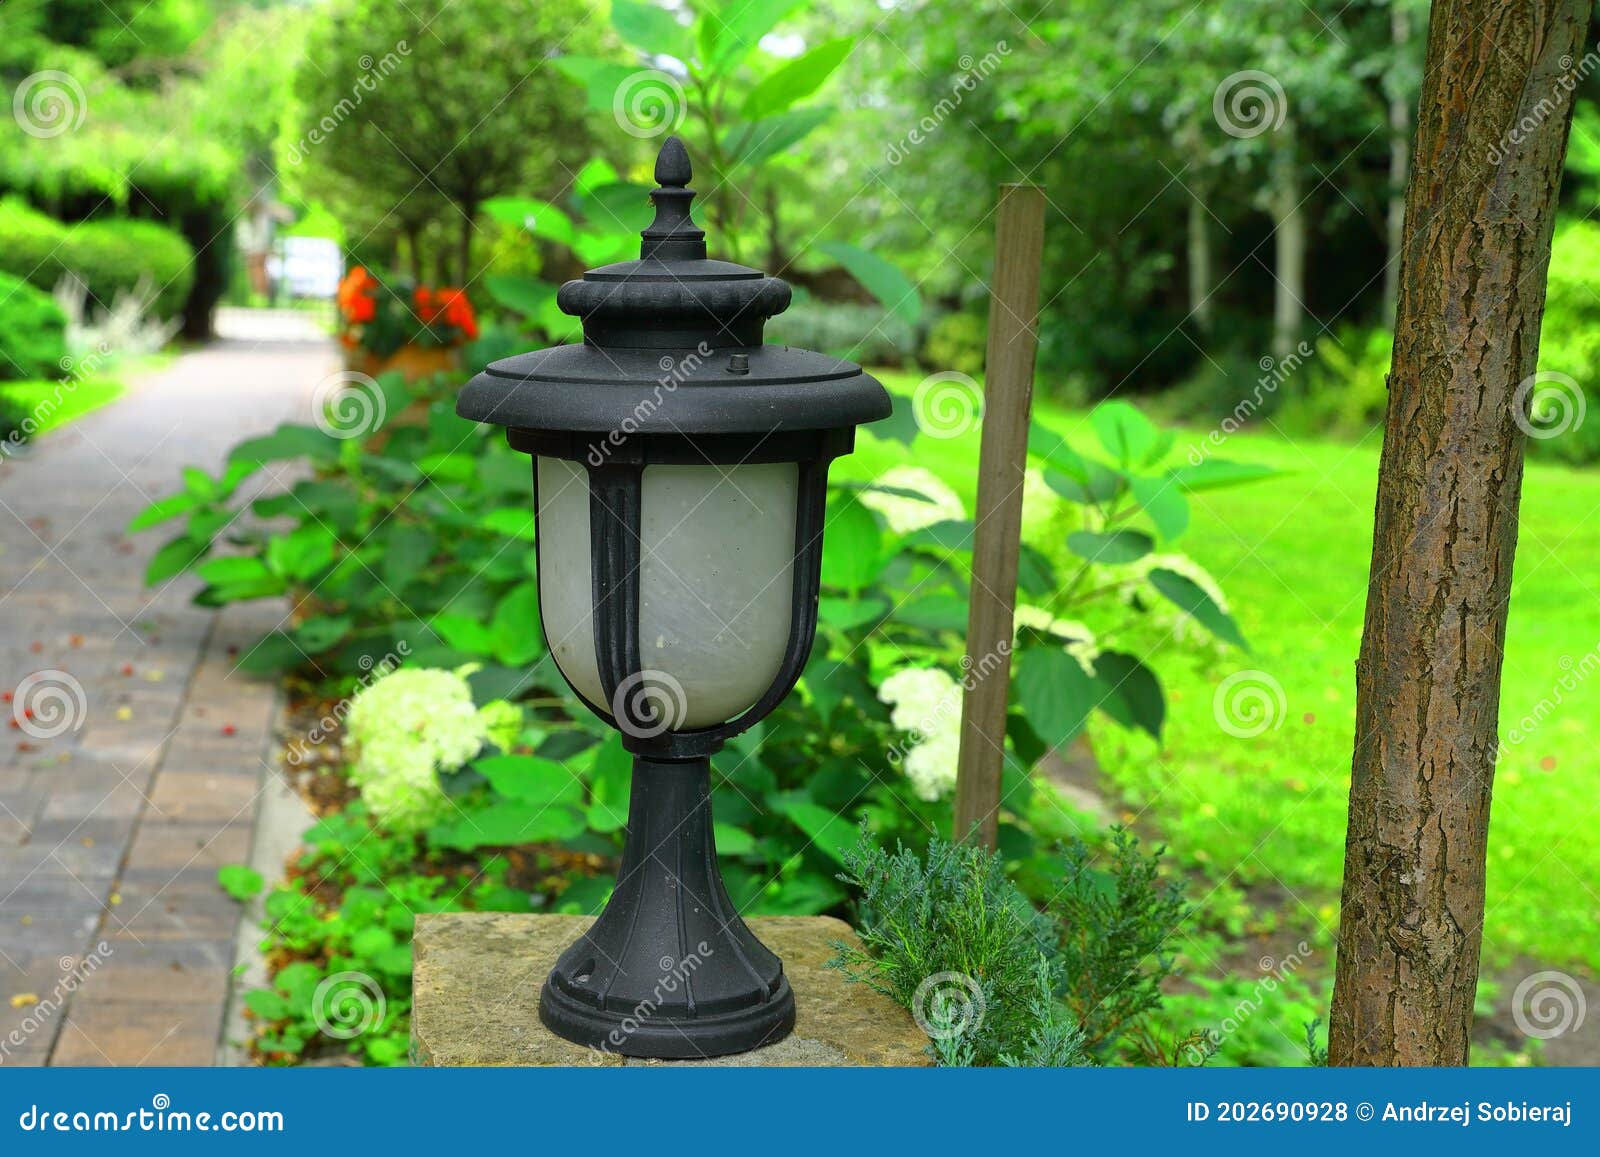 a stylish lighting lamp in the home garden